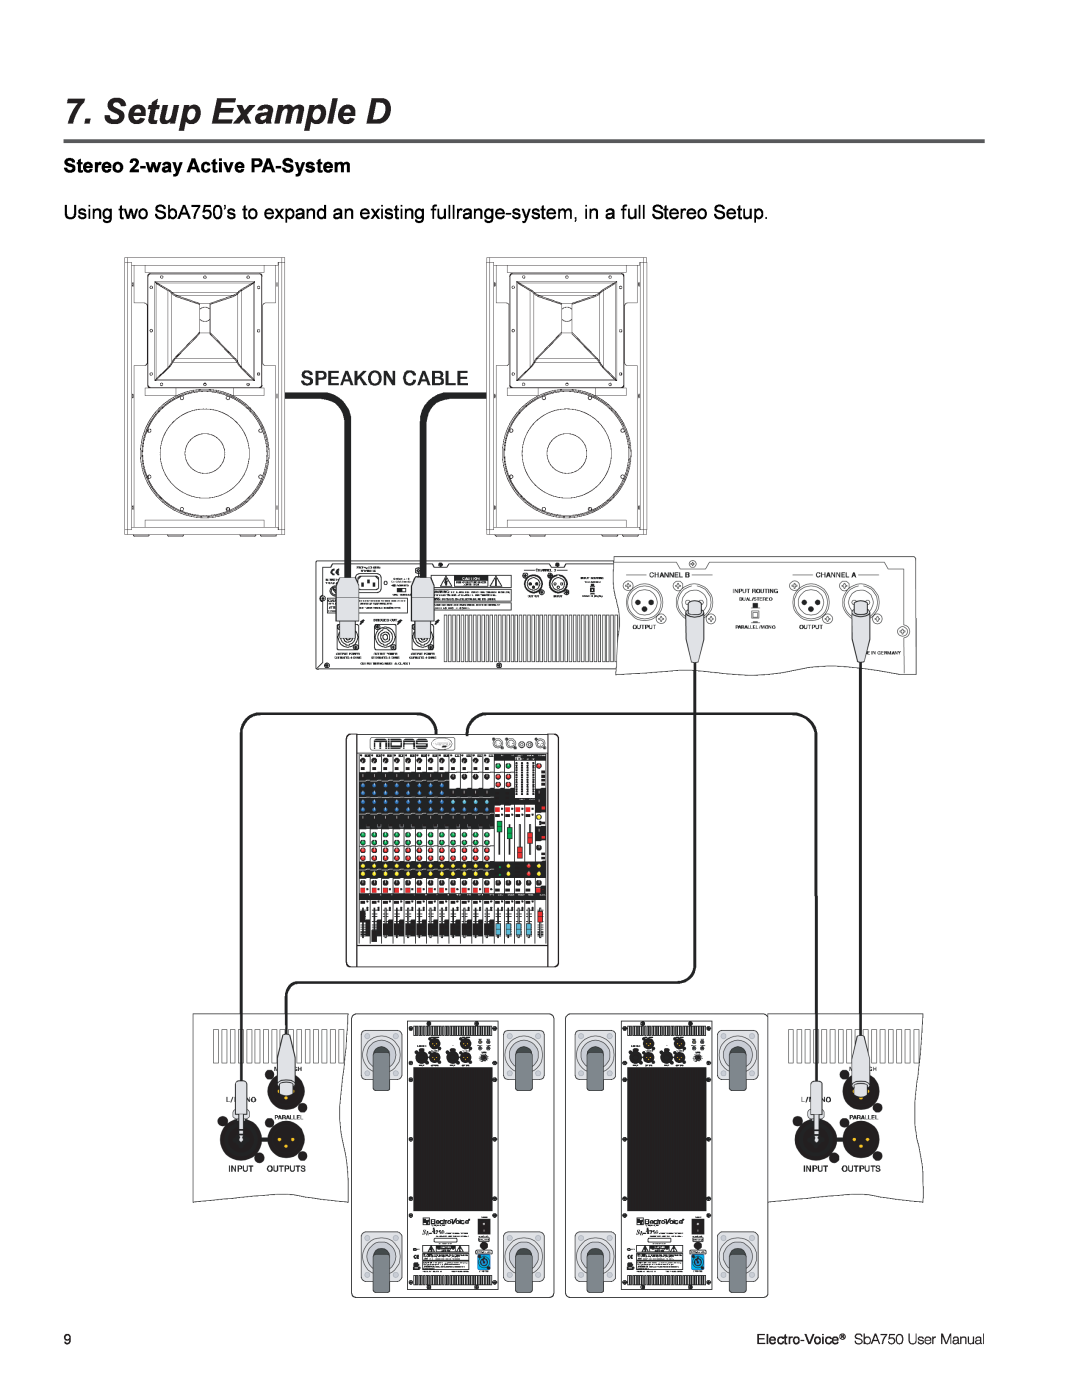 Electro-Voice SBA750 user manual Setup Example D, Stereo 2-wayActive PA-System, Electro-Voice 